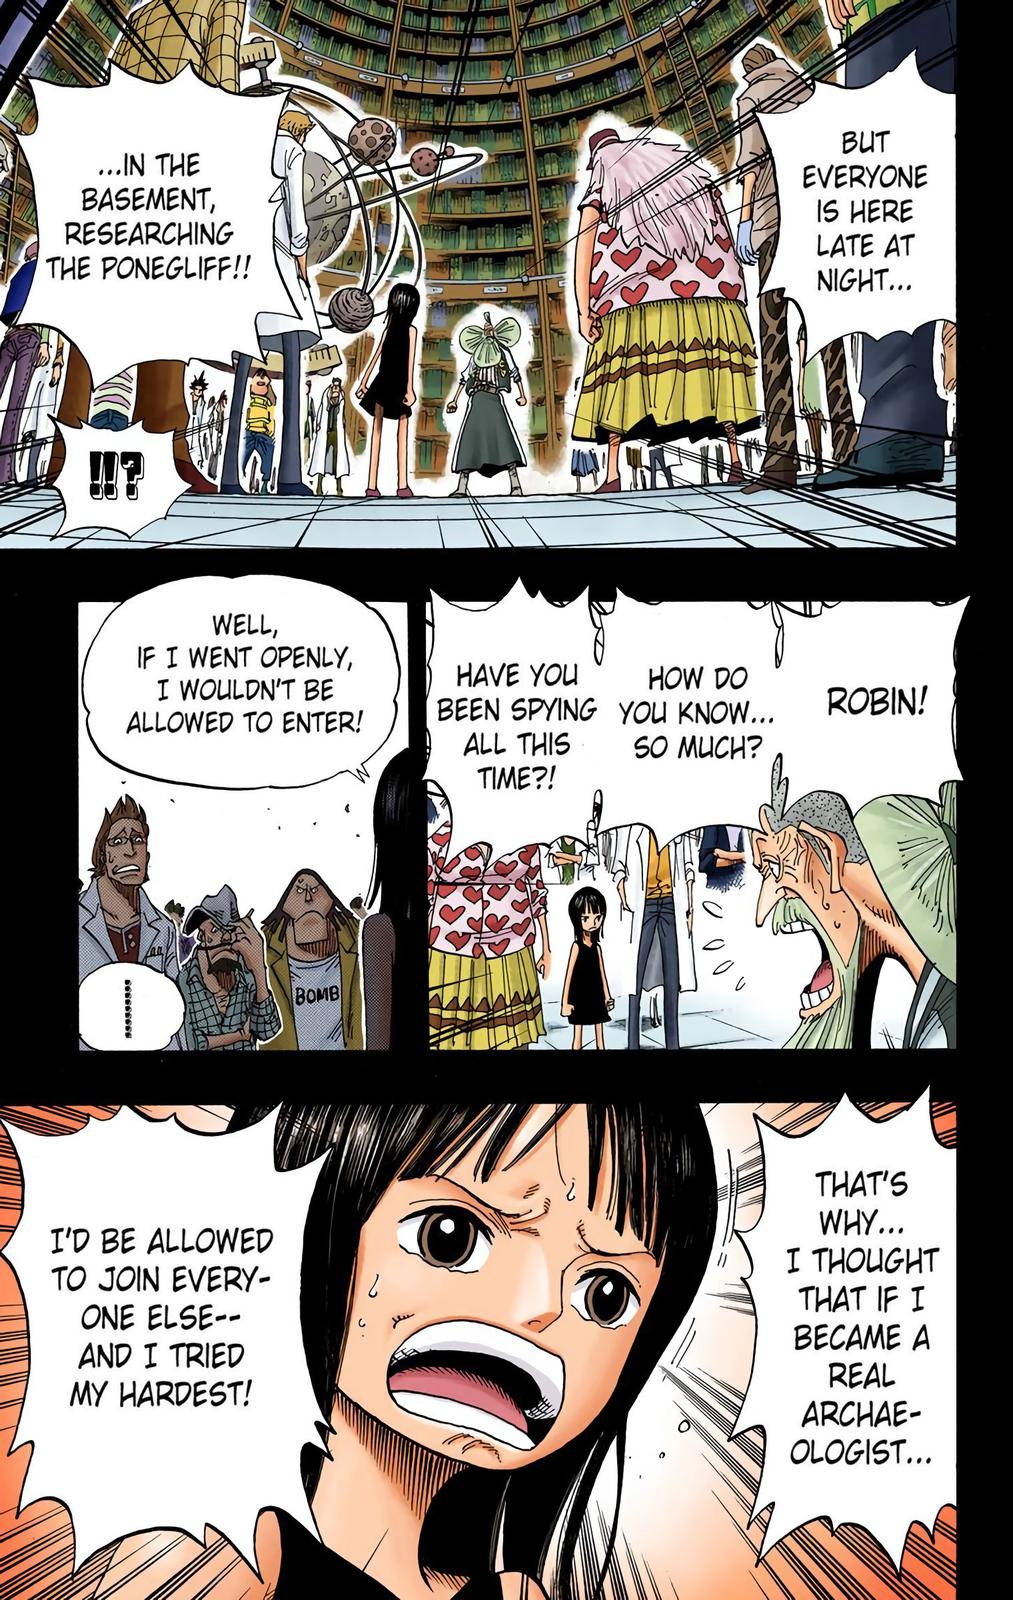 One Piece chapter 1066: How the World Government created their own